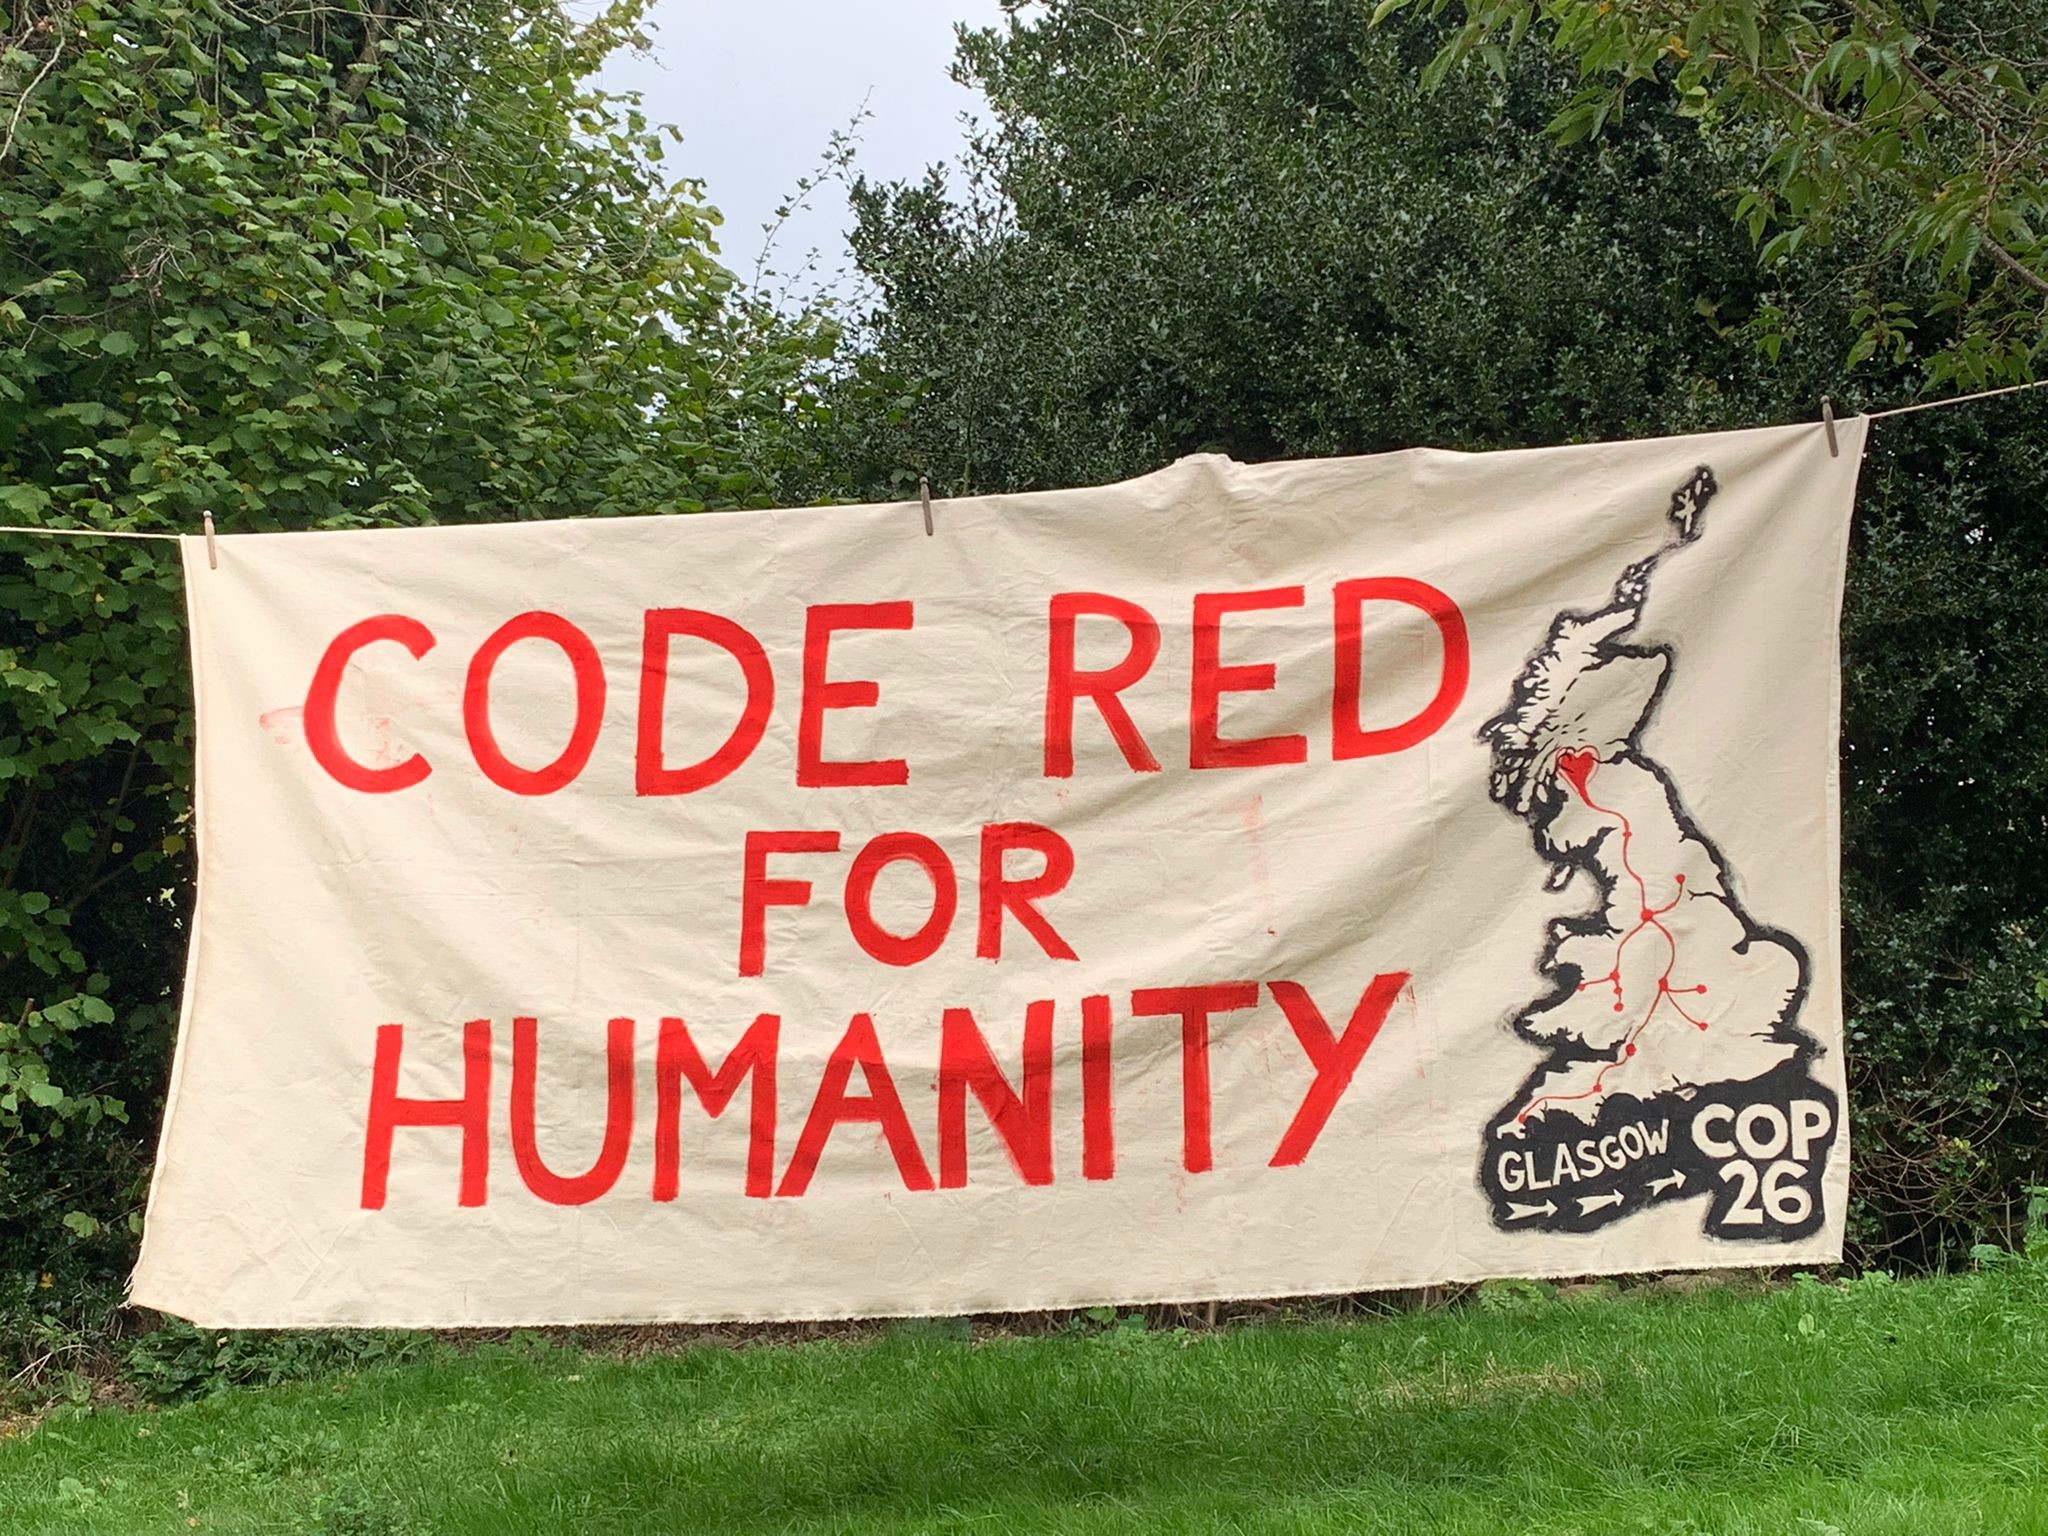 NEWS | Climate activists from Hereford and Ludlow to join Red Rebel Silent Three-Day Pilgrimage to COP26 in Glasgow